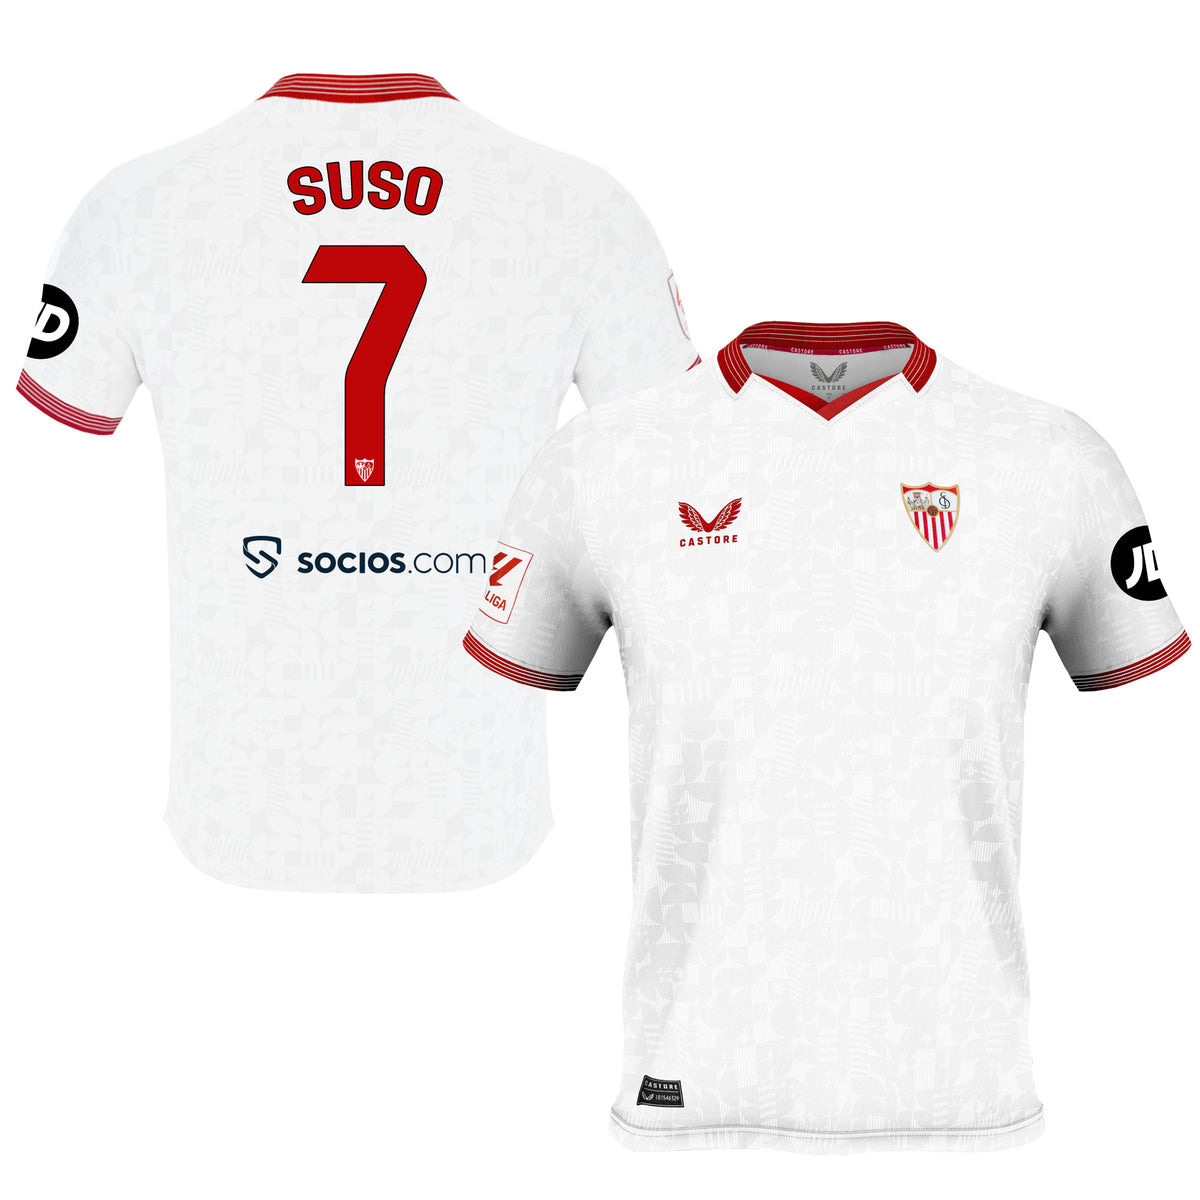 Adult Suso Home Shirt 23/24